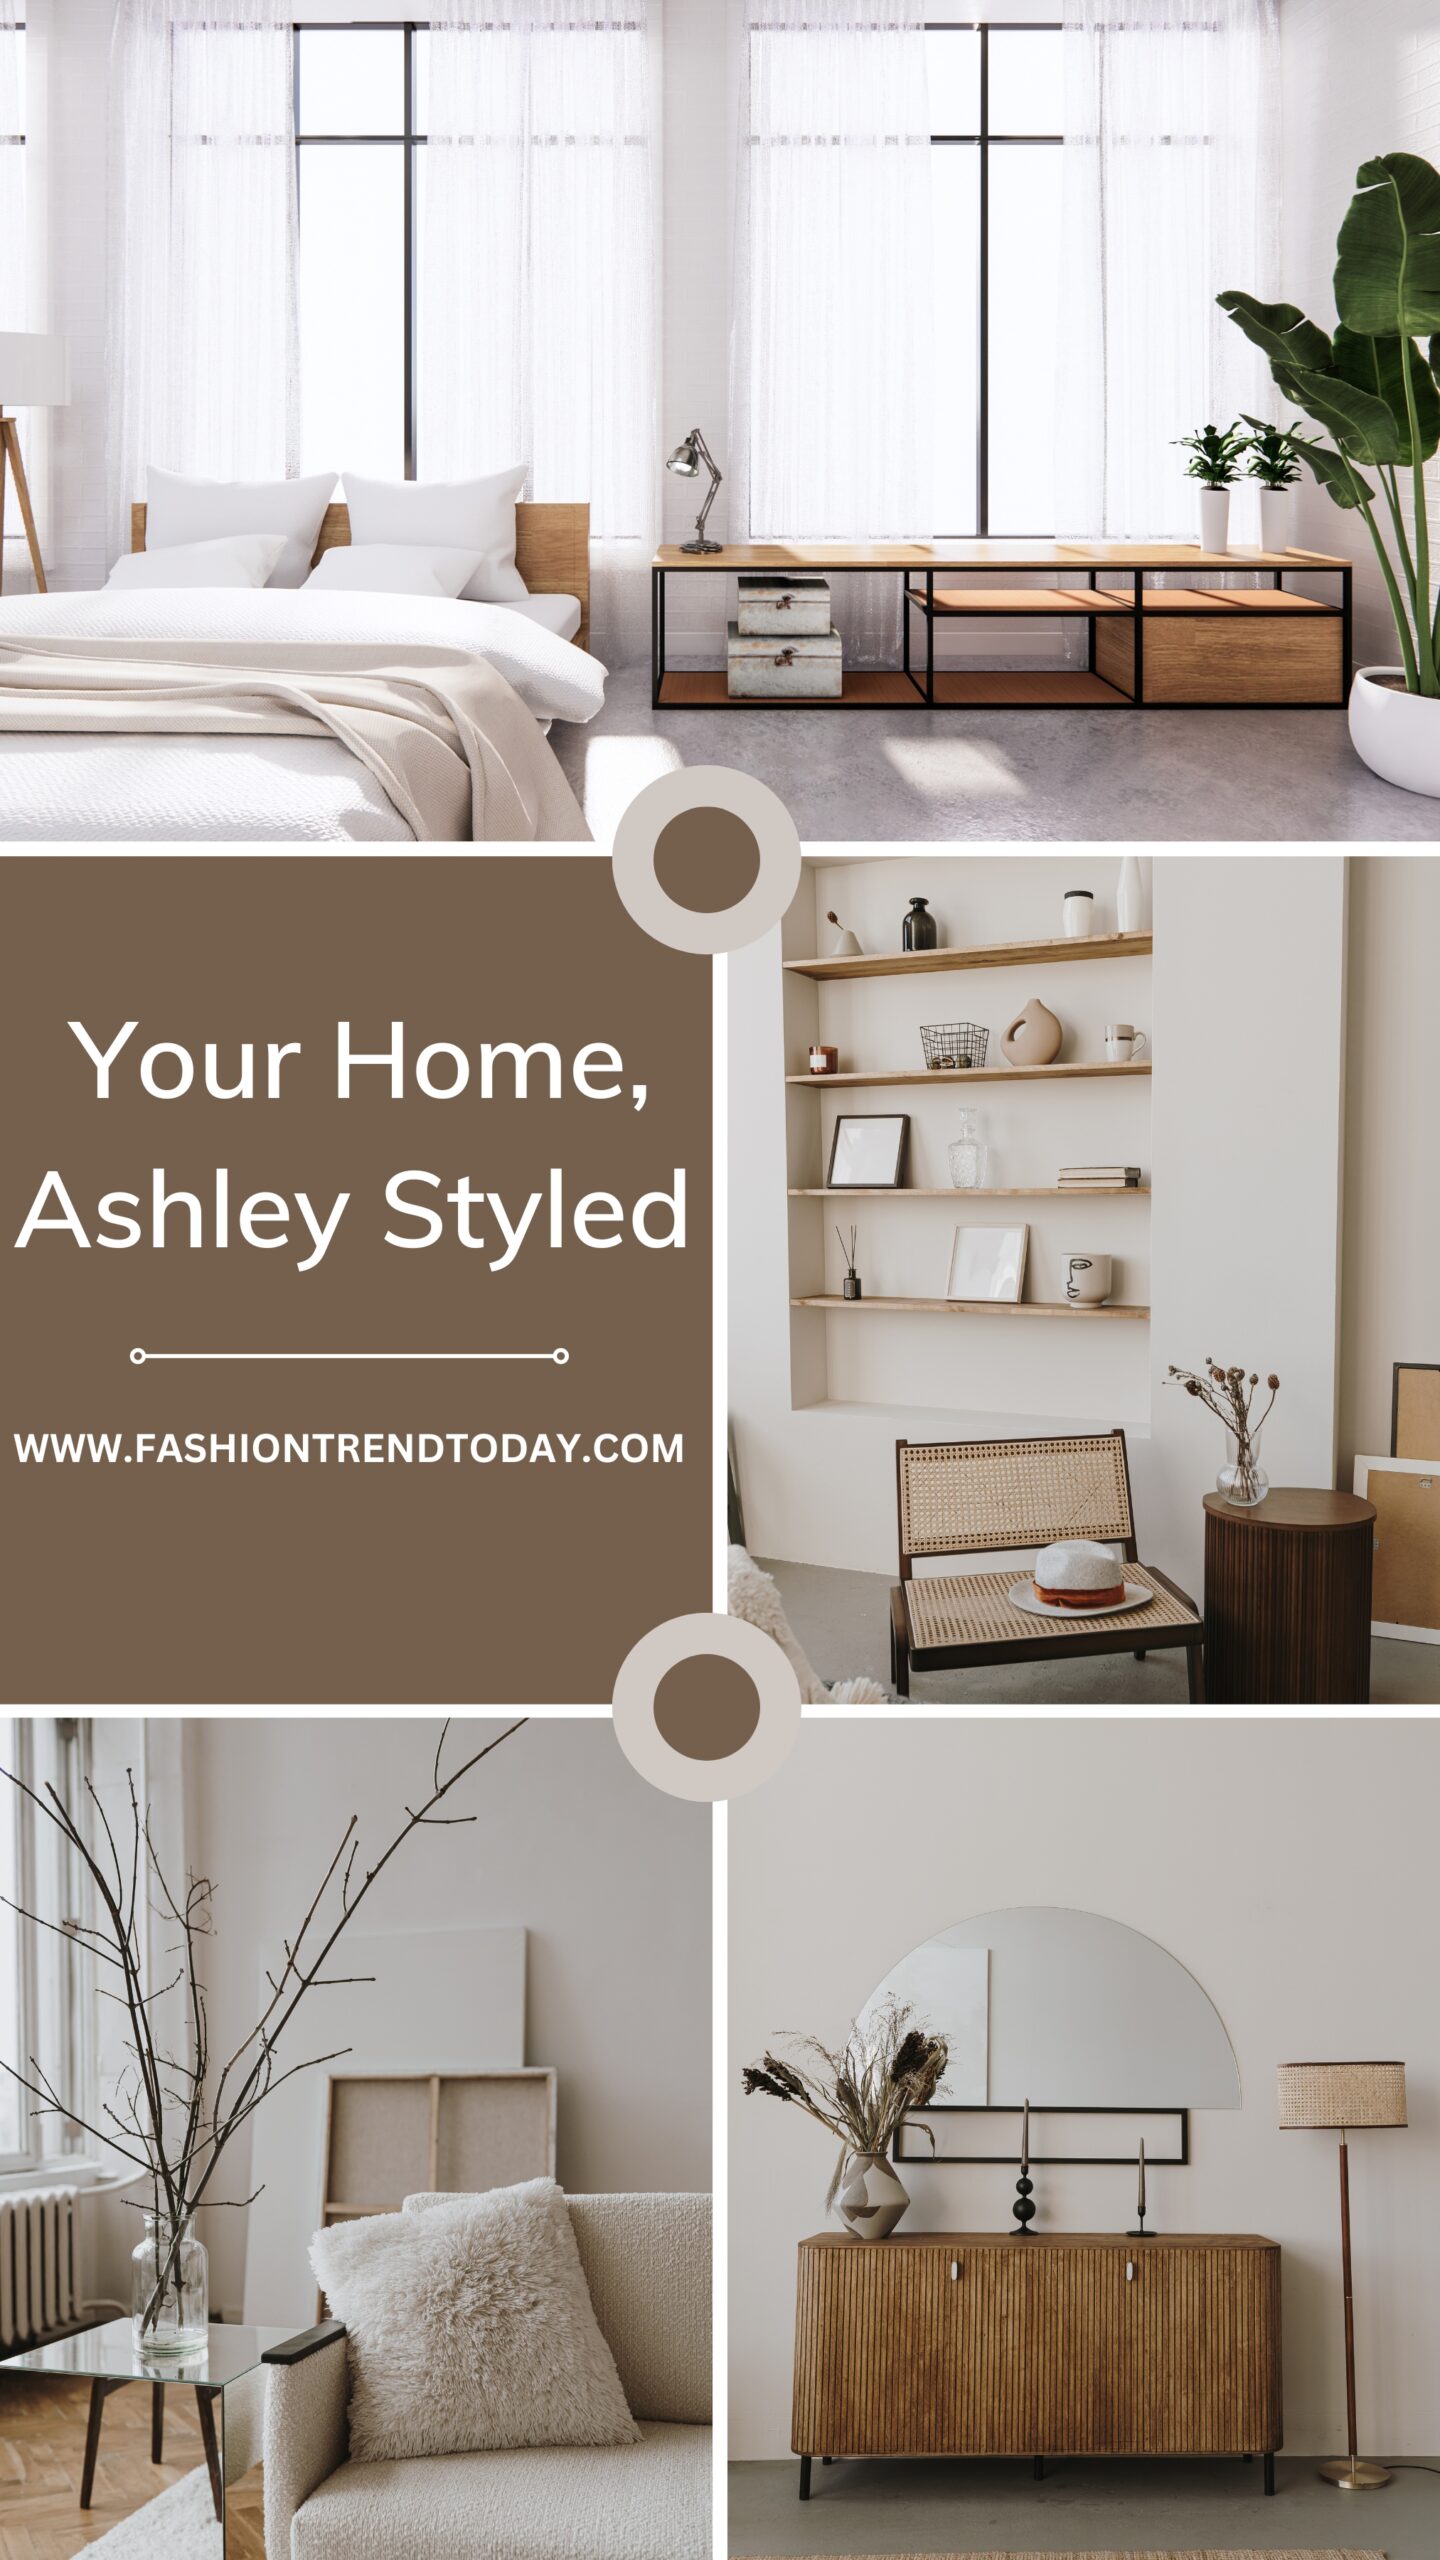 Your Home, Ashley Styled